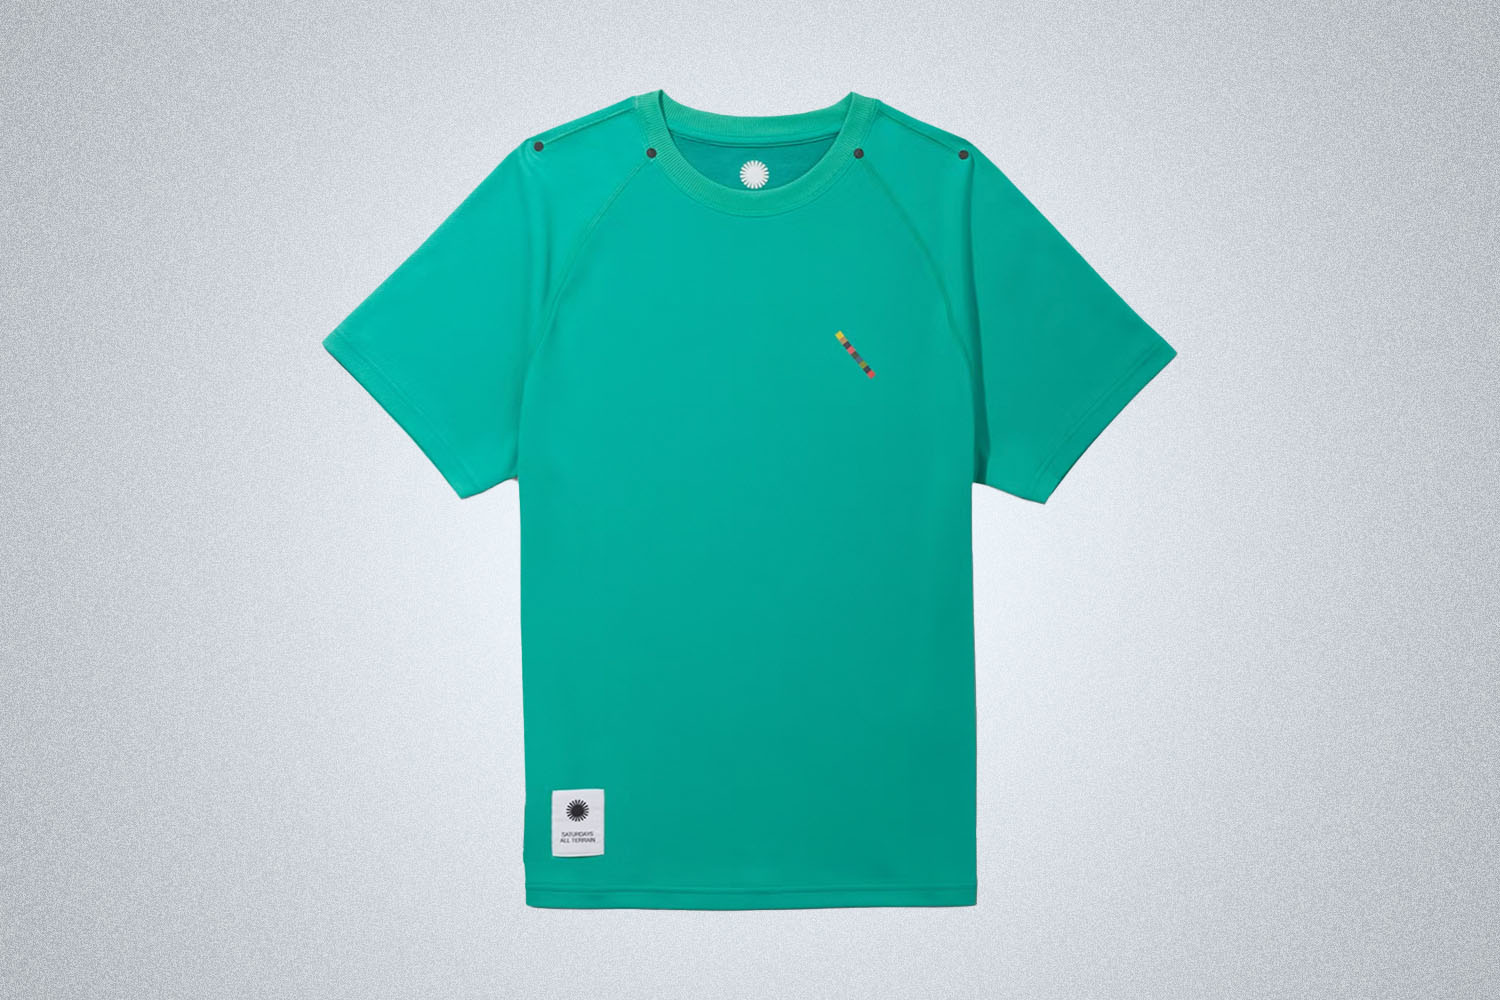 a teal active shirt from Saturdays NYC on a grey background